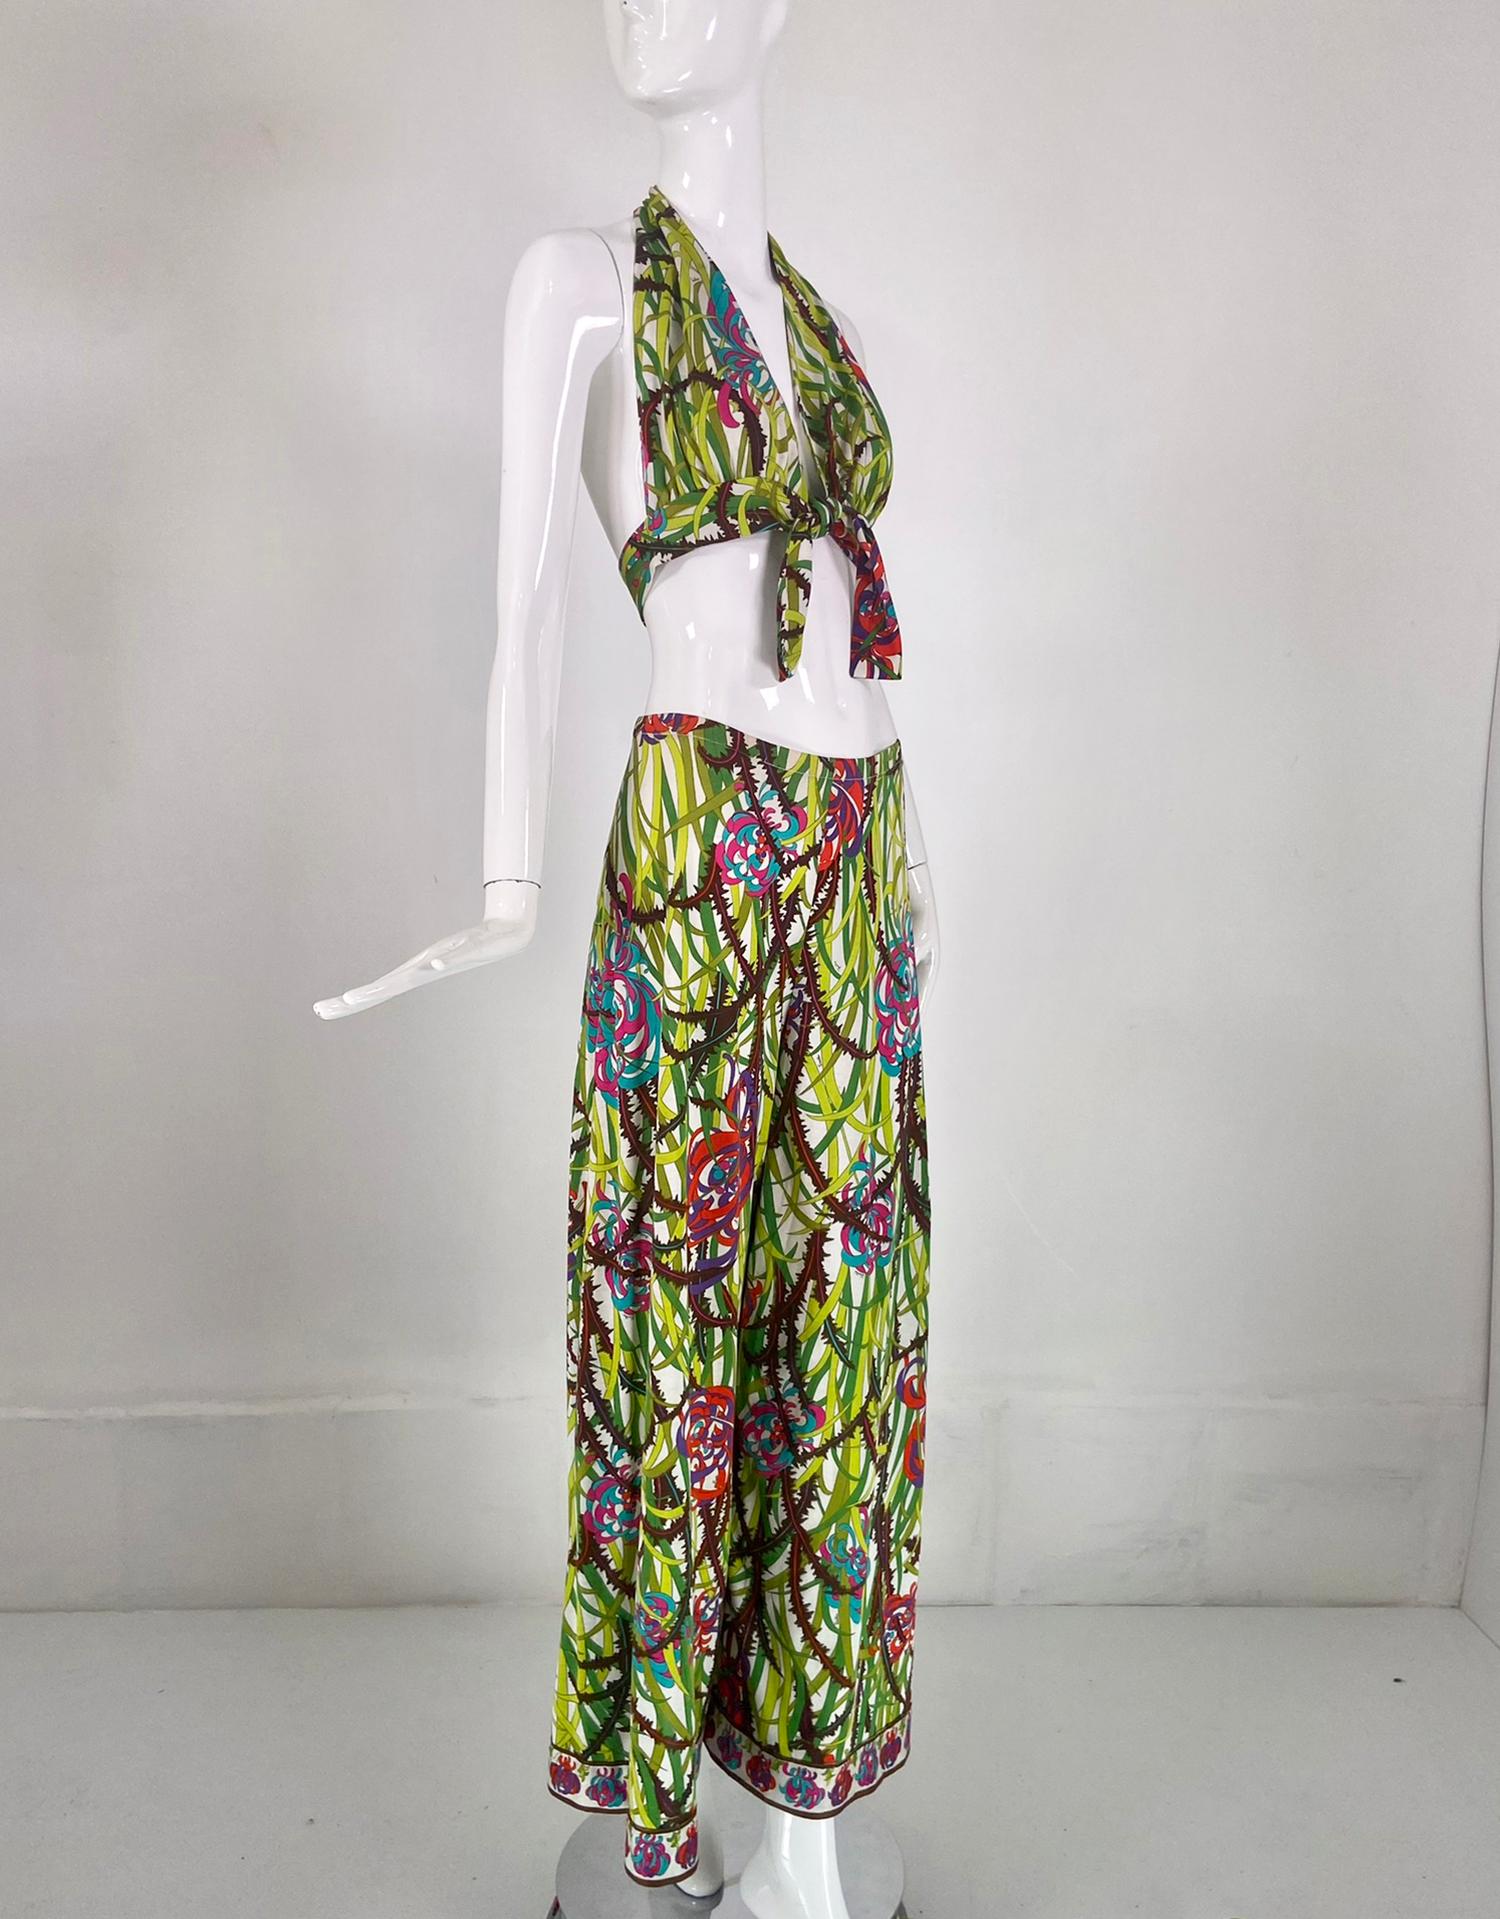 Emilio Pucci printed cotton jersey palazzo pant & tie front bra top, beach pajamas dated 4/15/1975. Halter neck bra top ties at the bust front, the matching pant sits on the hip, the legs are wide and fall very full to the border print hem. Narrow